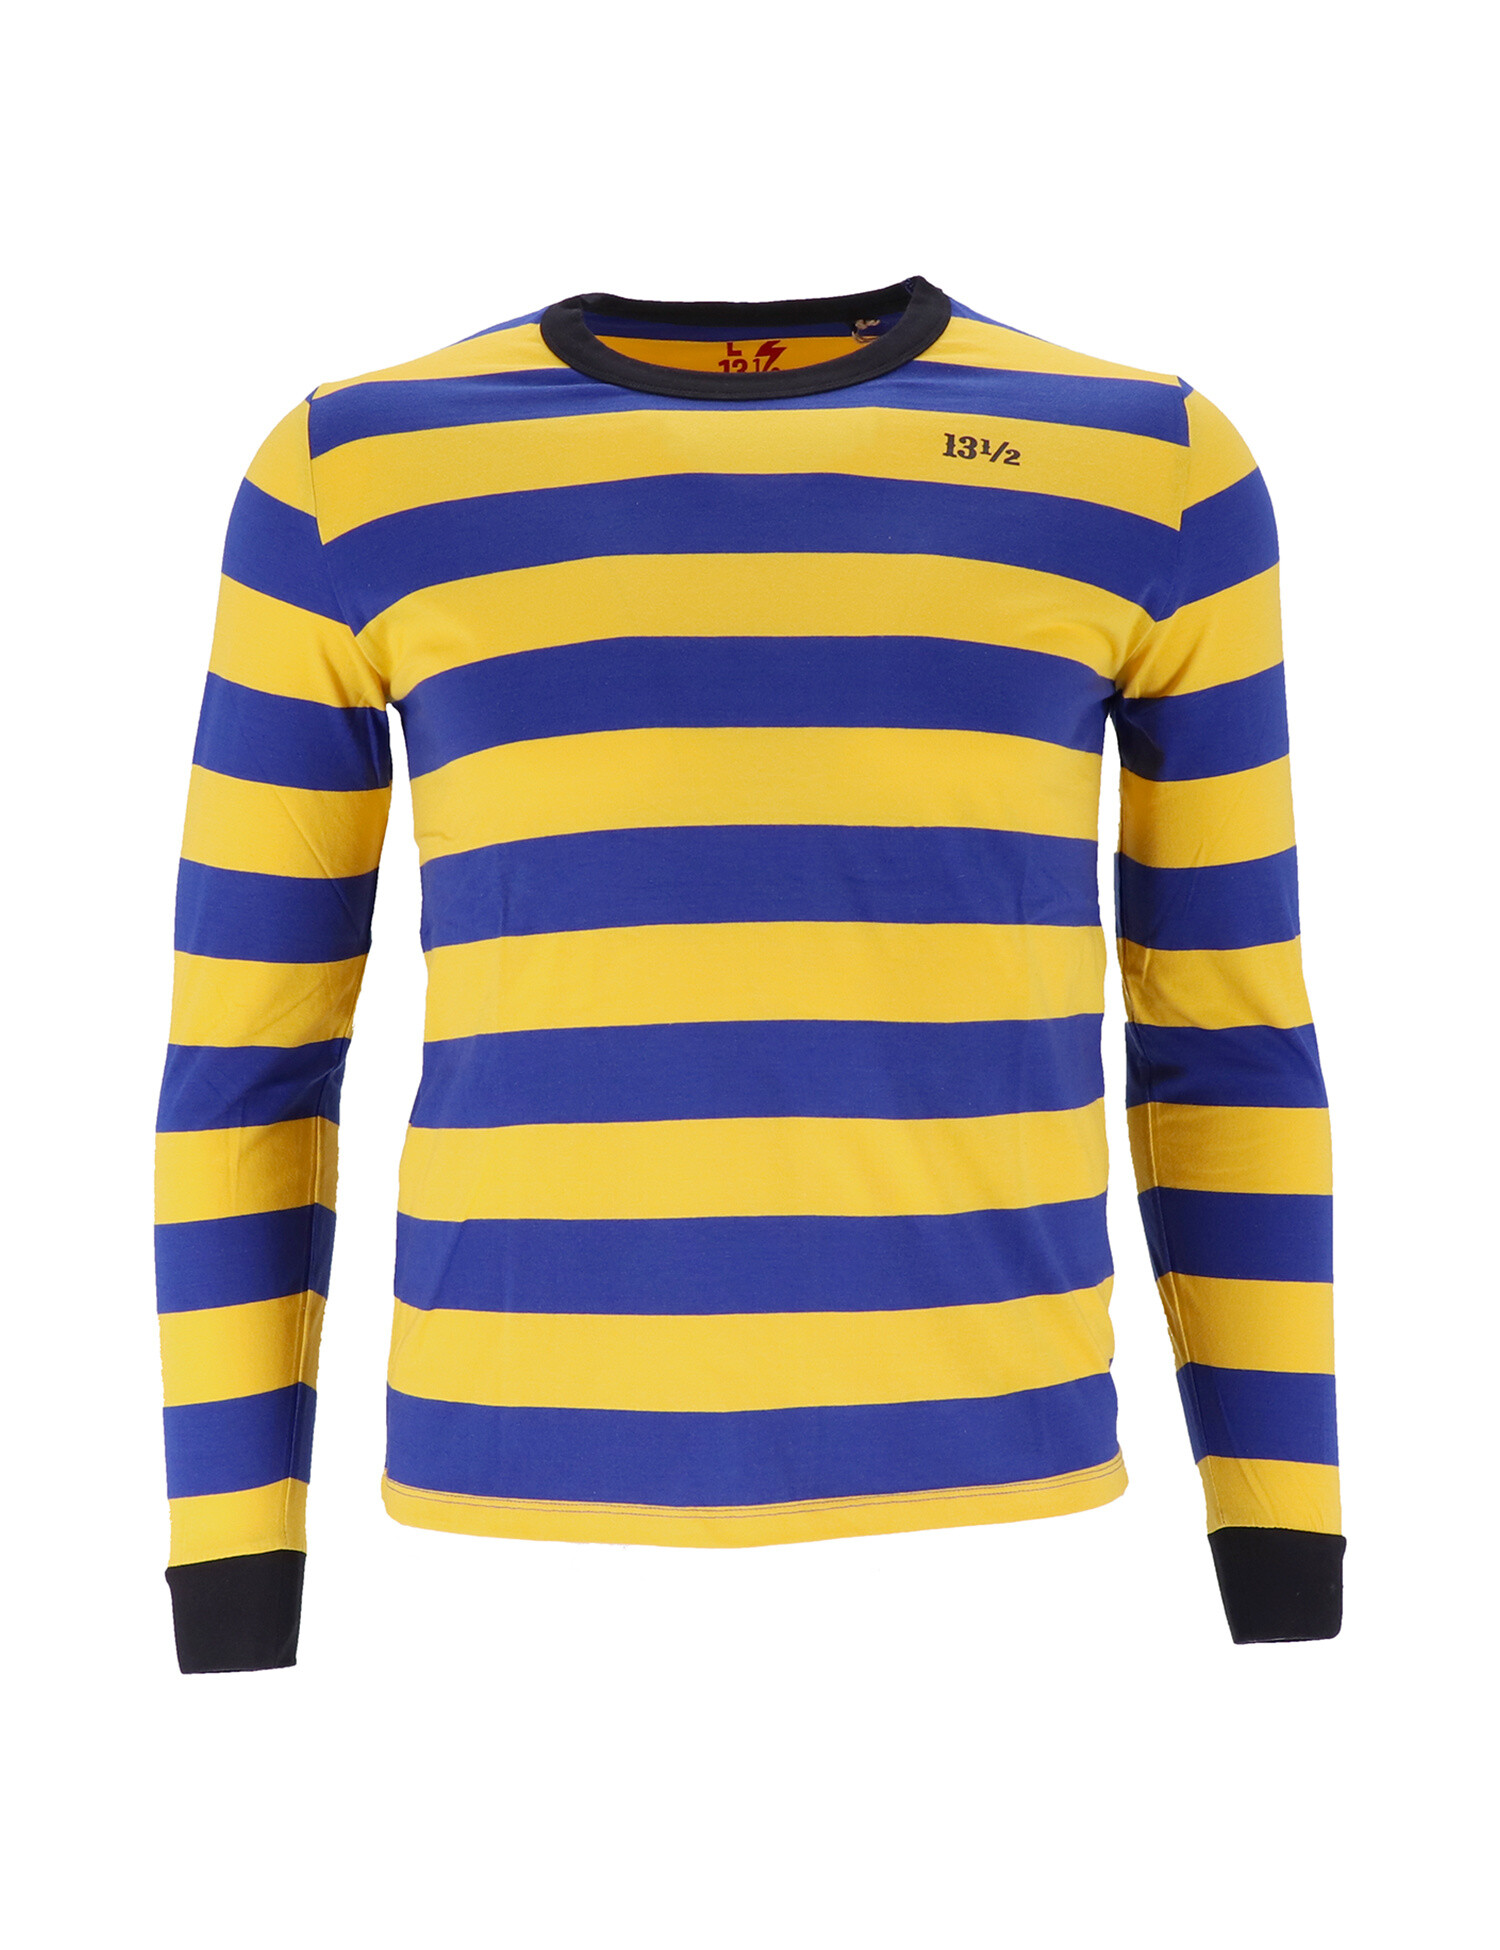 13 and a half Behind Bars longsleeve yellow/blue